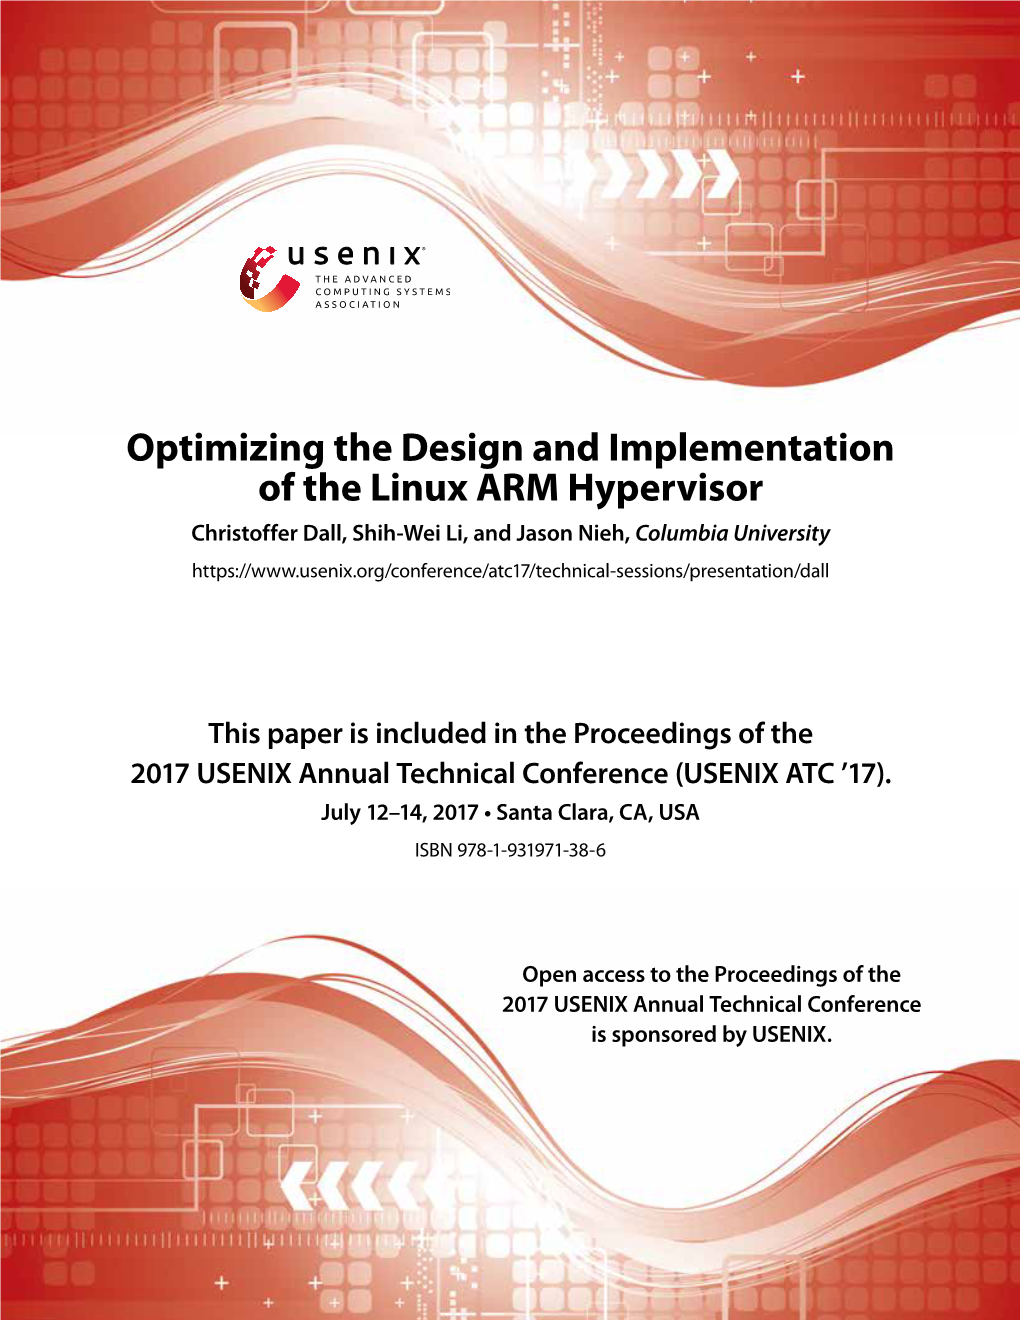 Optimizing the Design and Implementation of the Linux ARM